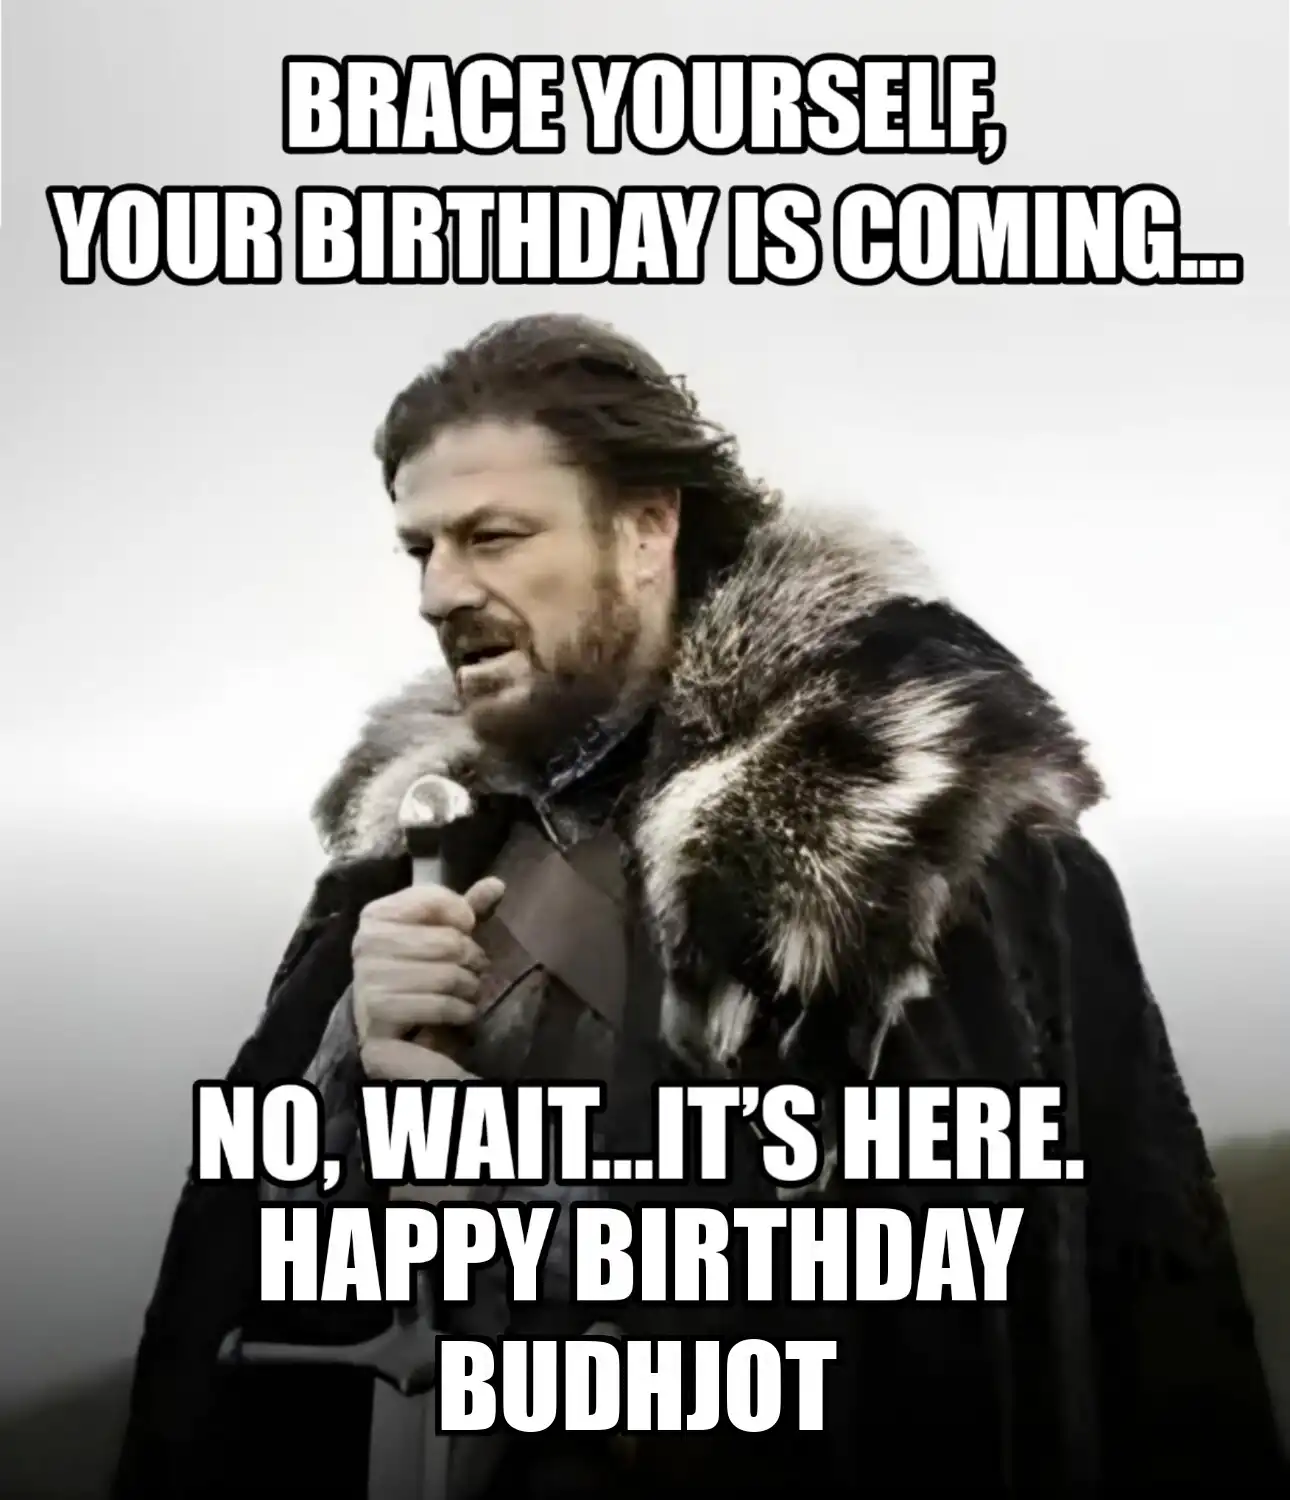 Happy Birthday Budhjot Brace Yourself Your Birthday Is Coming Meme